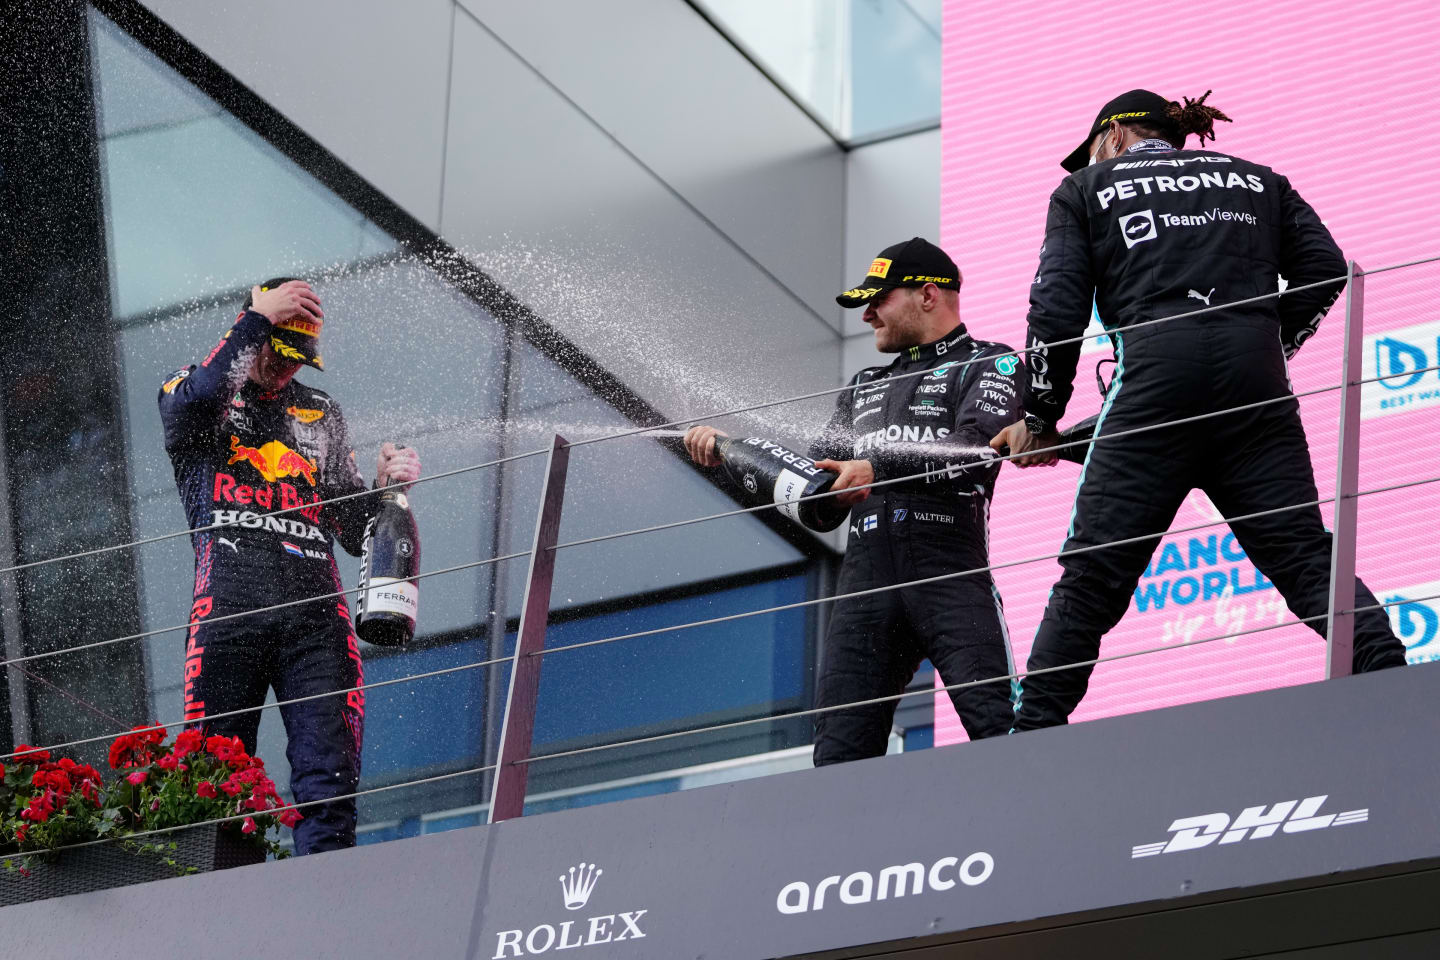 SPIELBERG, AUSTRIA - JUNE 27: Race winner Max Verstappen of Netherlands and Red Bull Racing, second placed Lewis Hamilton of Great Britain and Mercedes GP and third placed Valtteri Bottas of Finland and Mercedes GP celebrate on the podium during the F1 Grand Prix of Styria at Red Bull Ring on June 27, 2021 in Spielberg, Austria. (Photo by Darko Vojinovic - Pool/Getty Images)